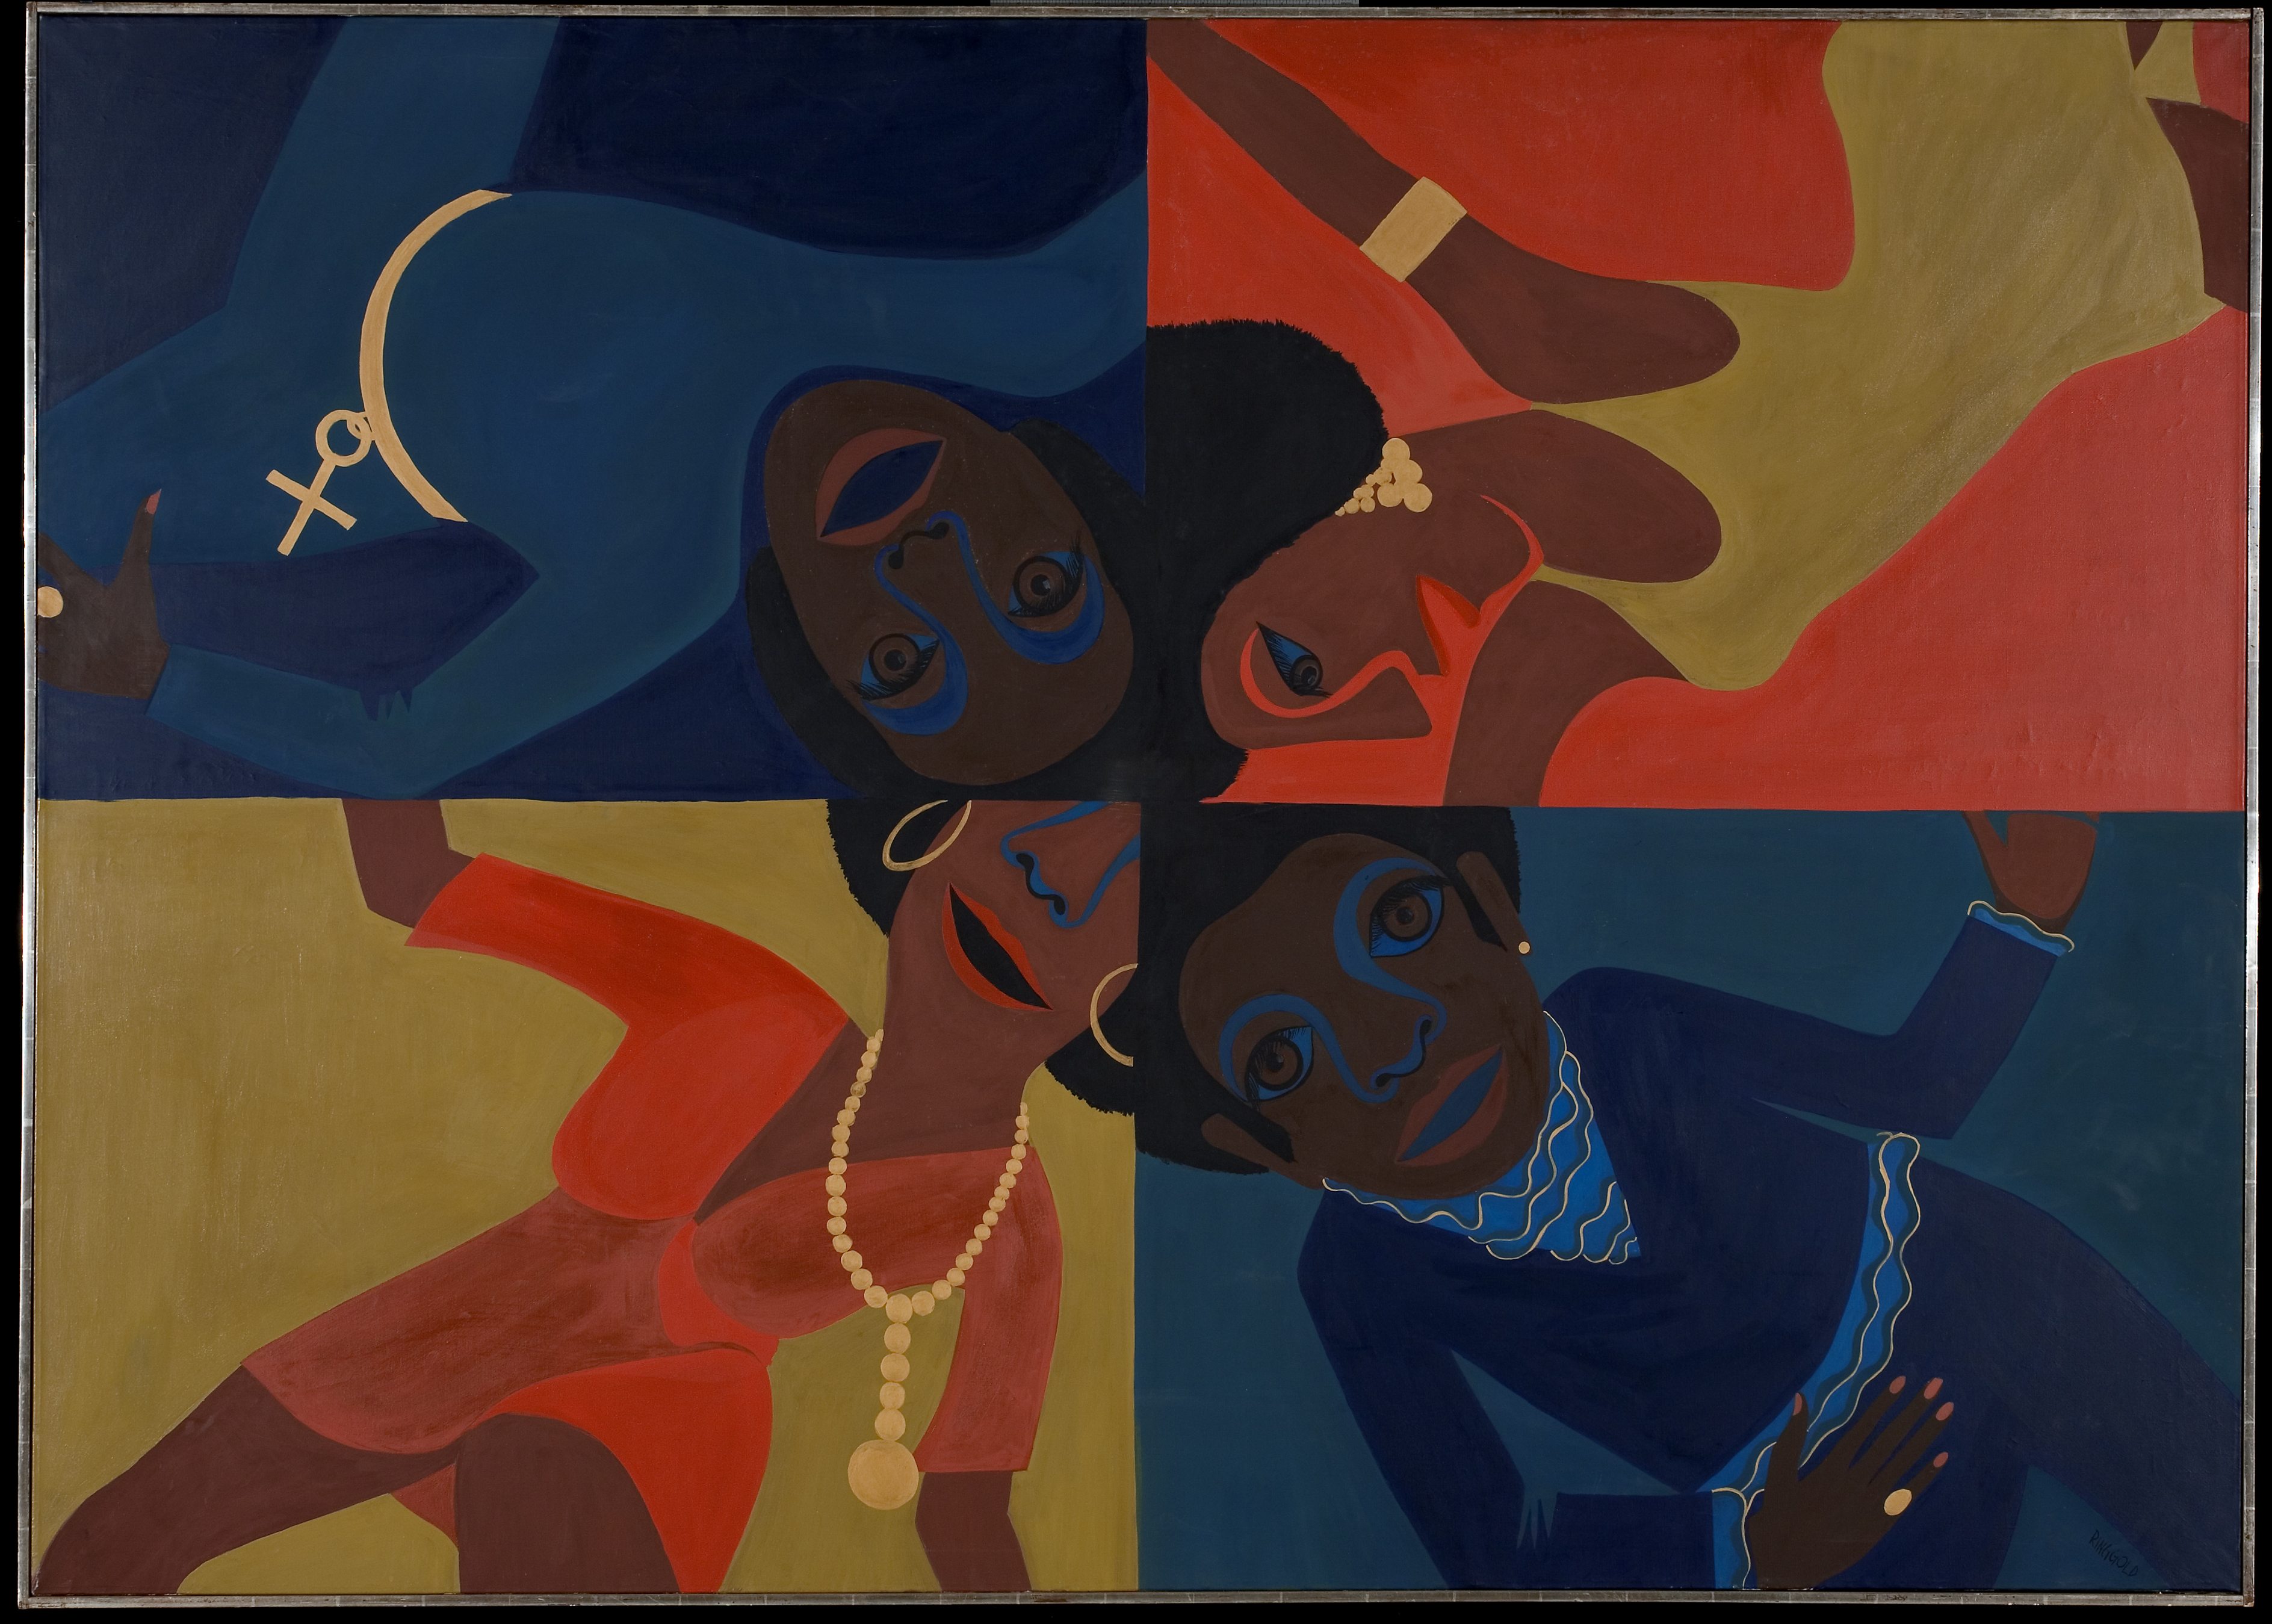 Party Time shows four Black figures, dressed in party attire and gold jewelry dancing. The four figures are in front of red, light blue, ochre, and dark blue backgrounds, oriented with their heads towards the center of the painting, dynamically occupying the space of the canvas and beyond. In this painting in particular, Ringgold achieved what she called a “poly-rhythmical space,” where action is happening on the entire canvas, not only in one small area of focus.